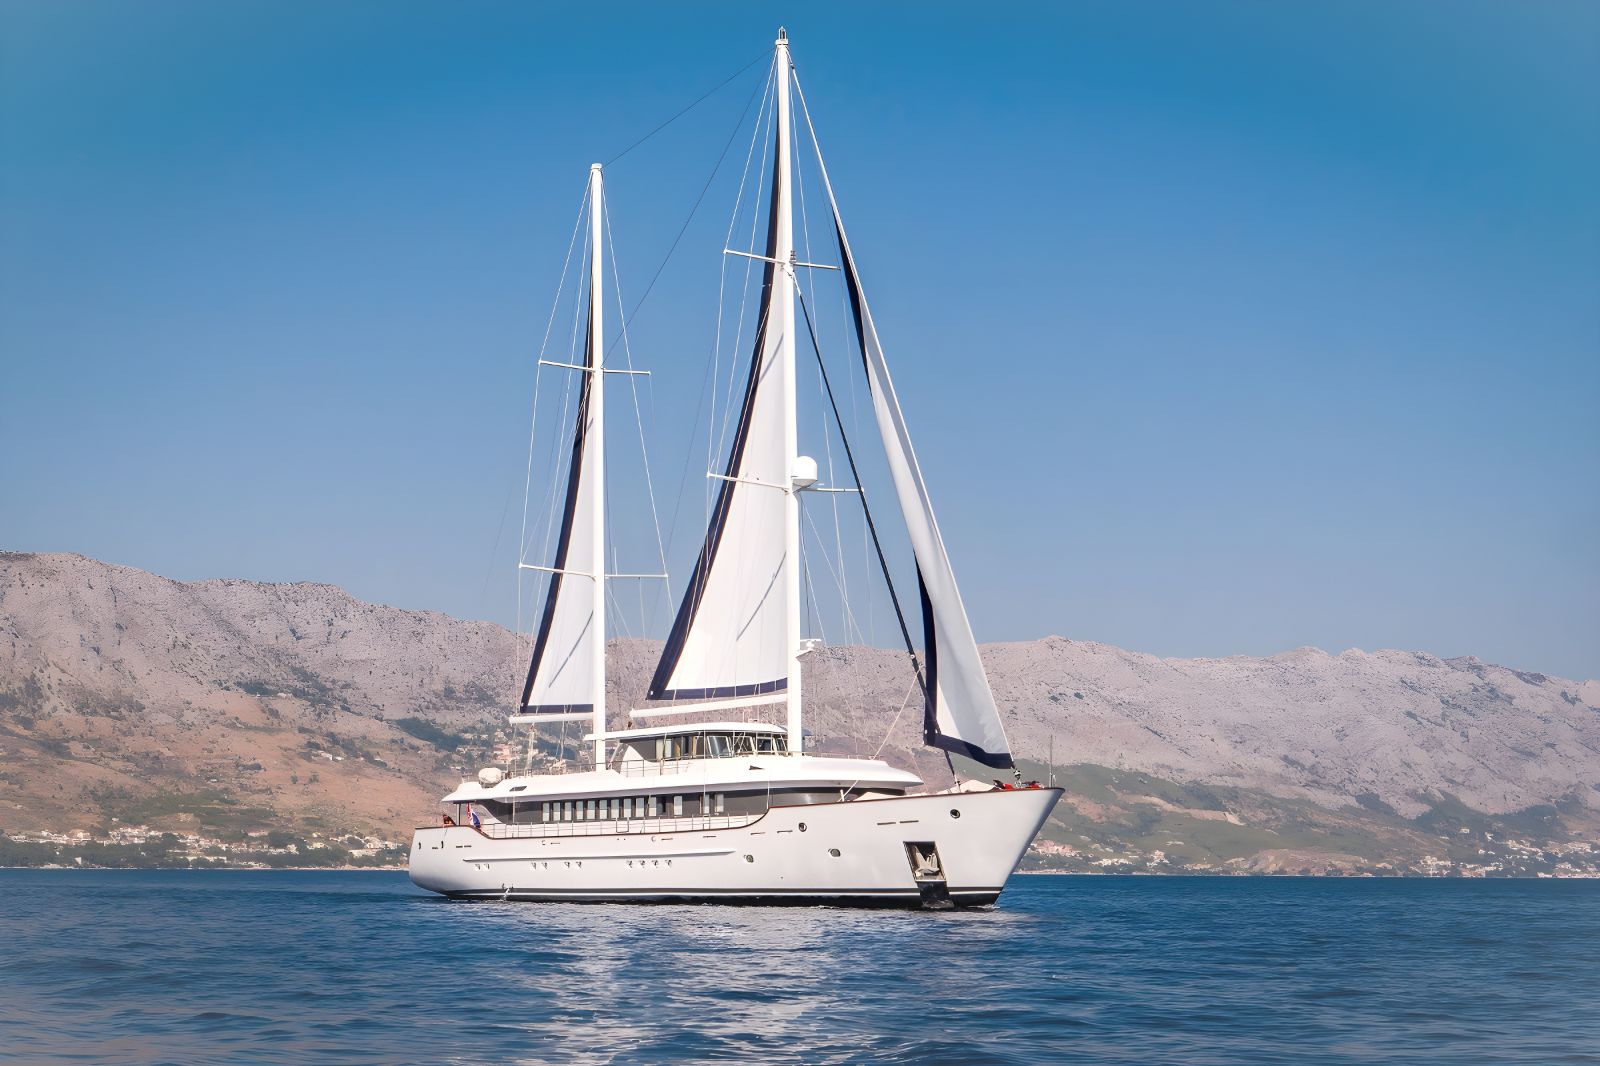 Exterior view of the Omnia gulet with sails up in Croatia